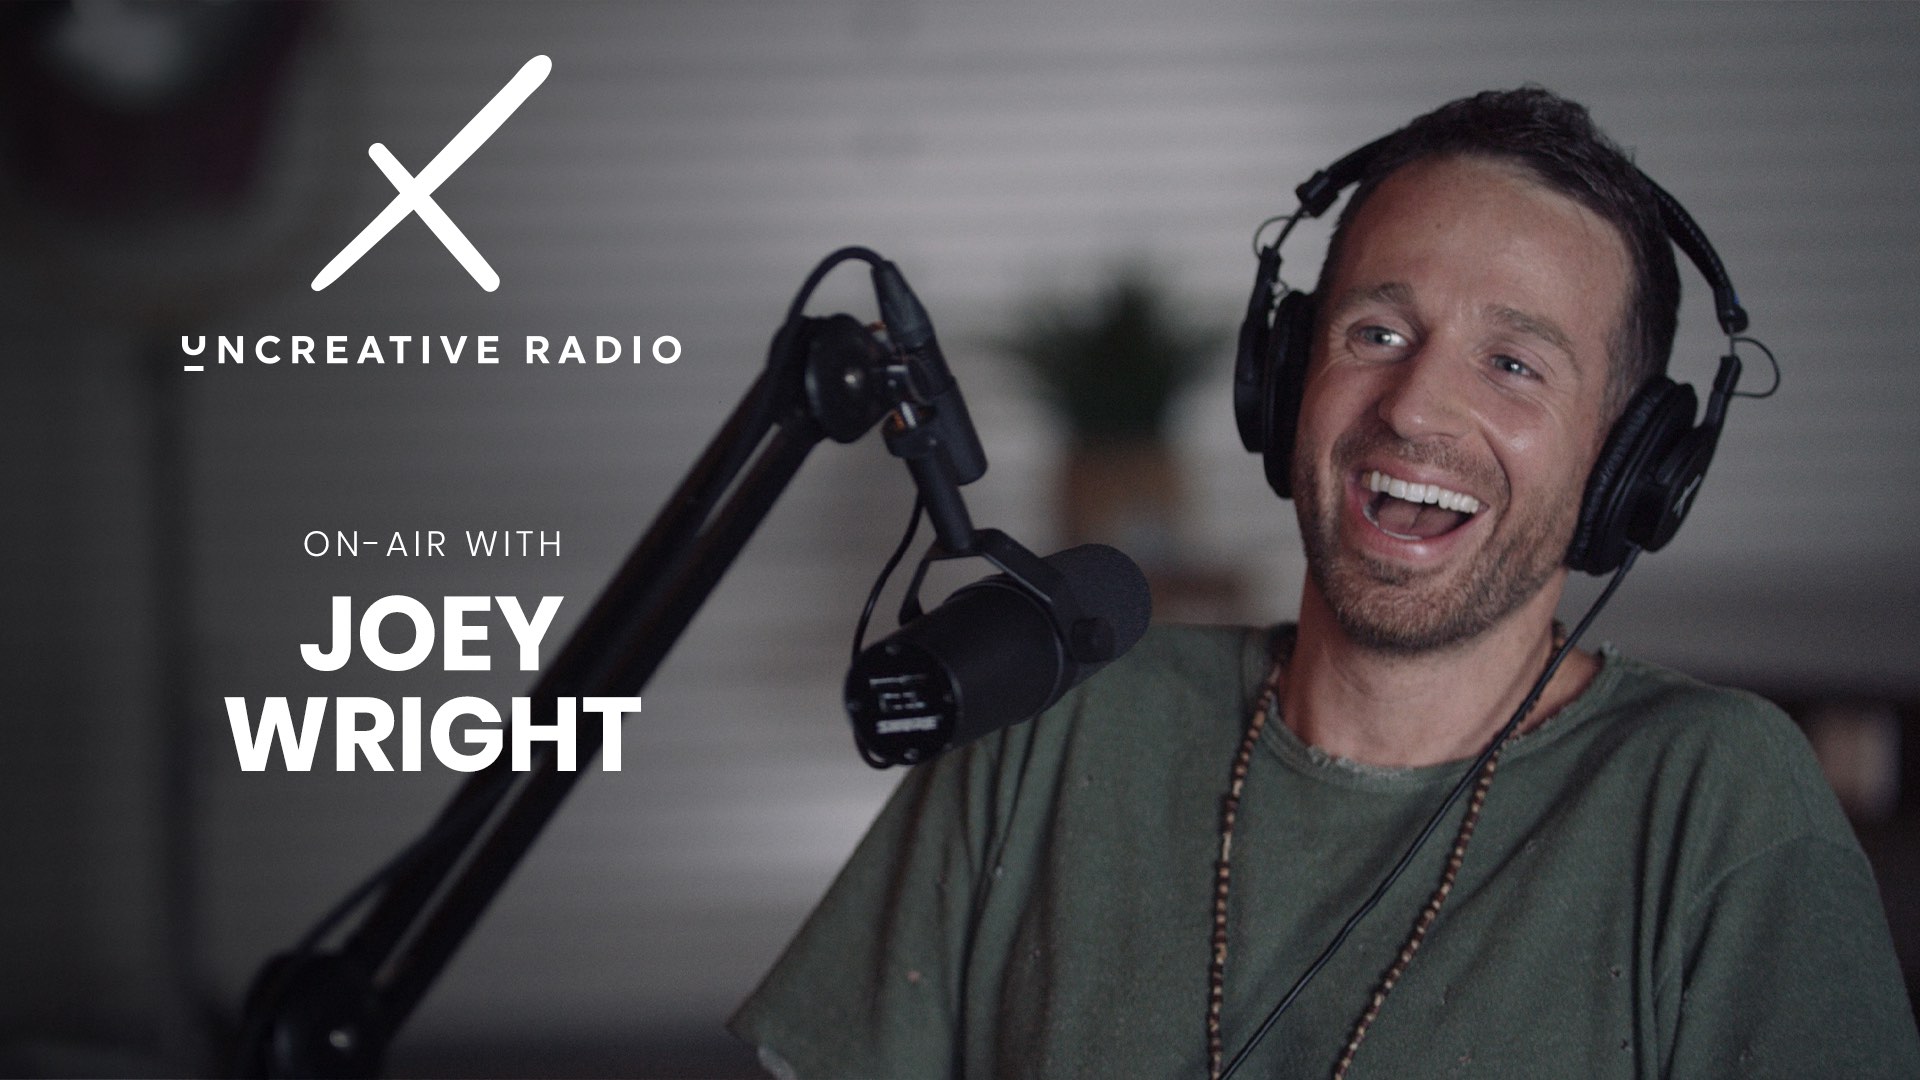 White X Uncreative Radio logo on air with Joey Wright title with him with short beard and hair wearing black headphones and olive green shirt smiling for the camera by a microphone